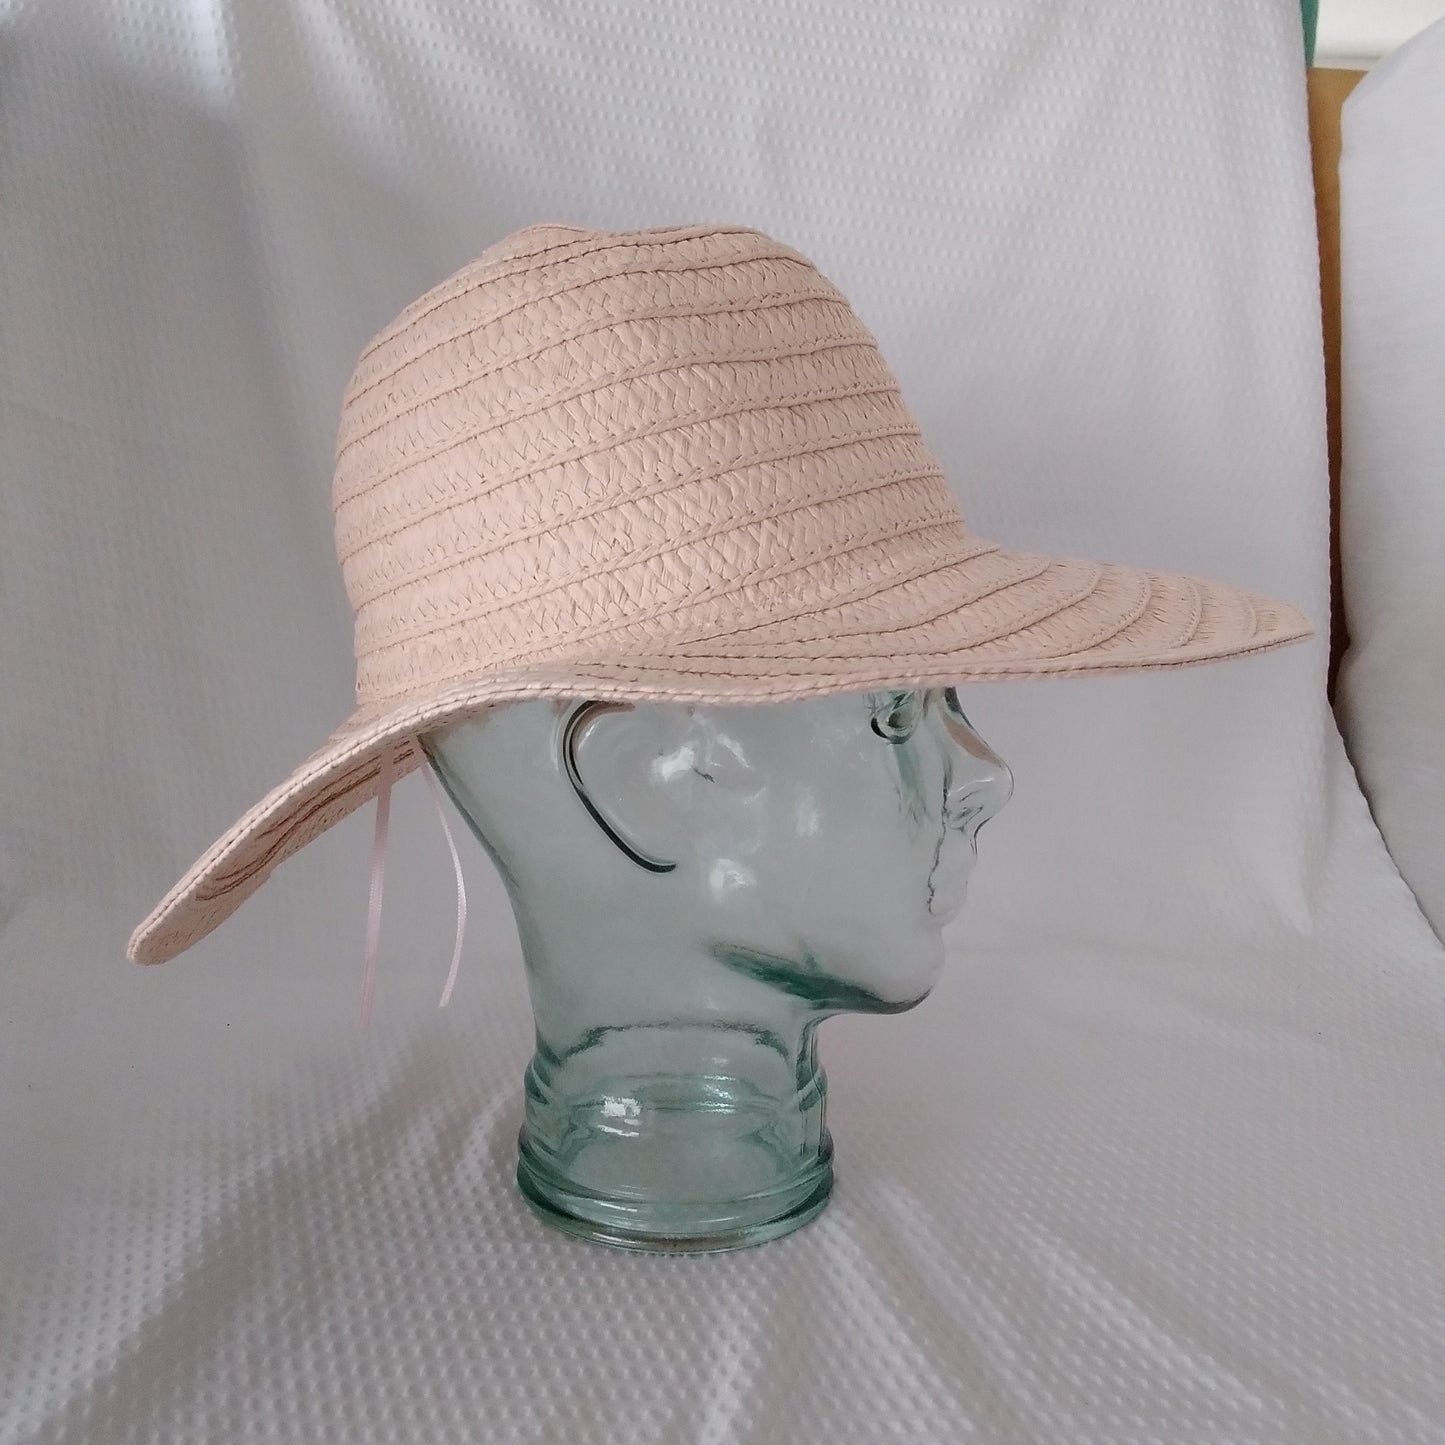 Time and True Women's Pink floppy Hat